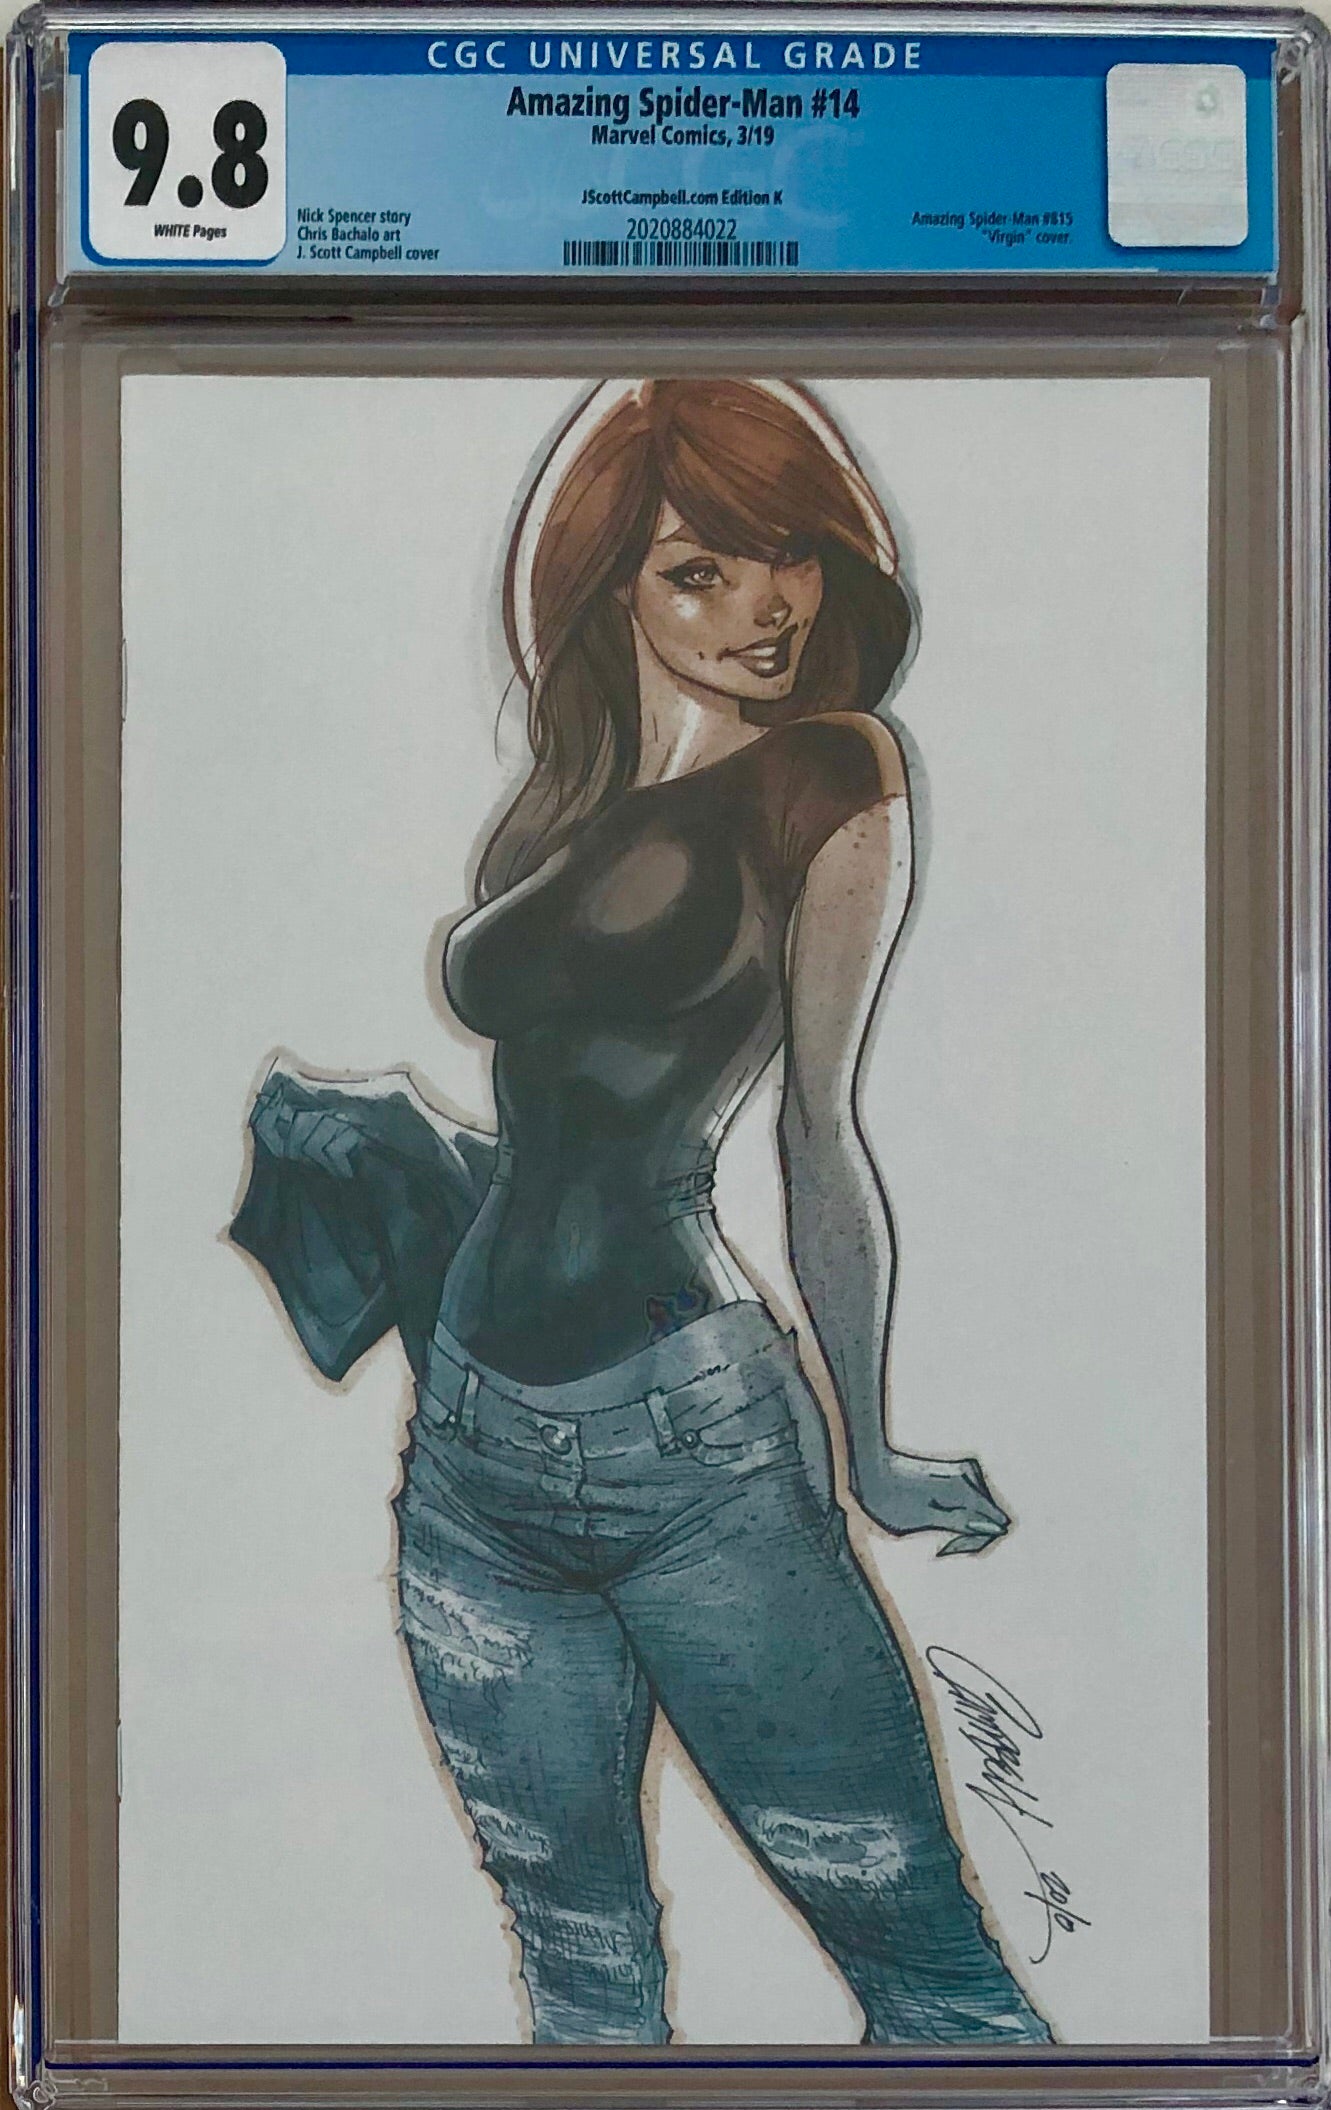 Amazing Spider-Man #14 J. Scott Campbell Edition K "Face it Tiger" MJ SDCC Virgin Exclusive CGC 9.8